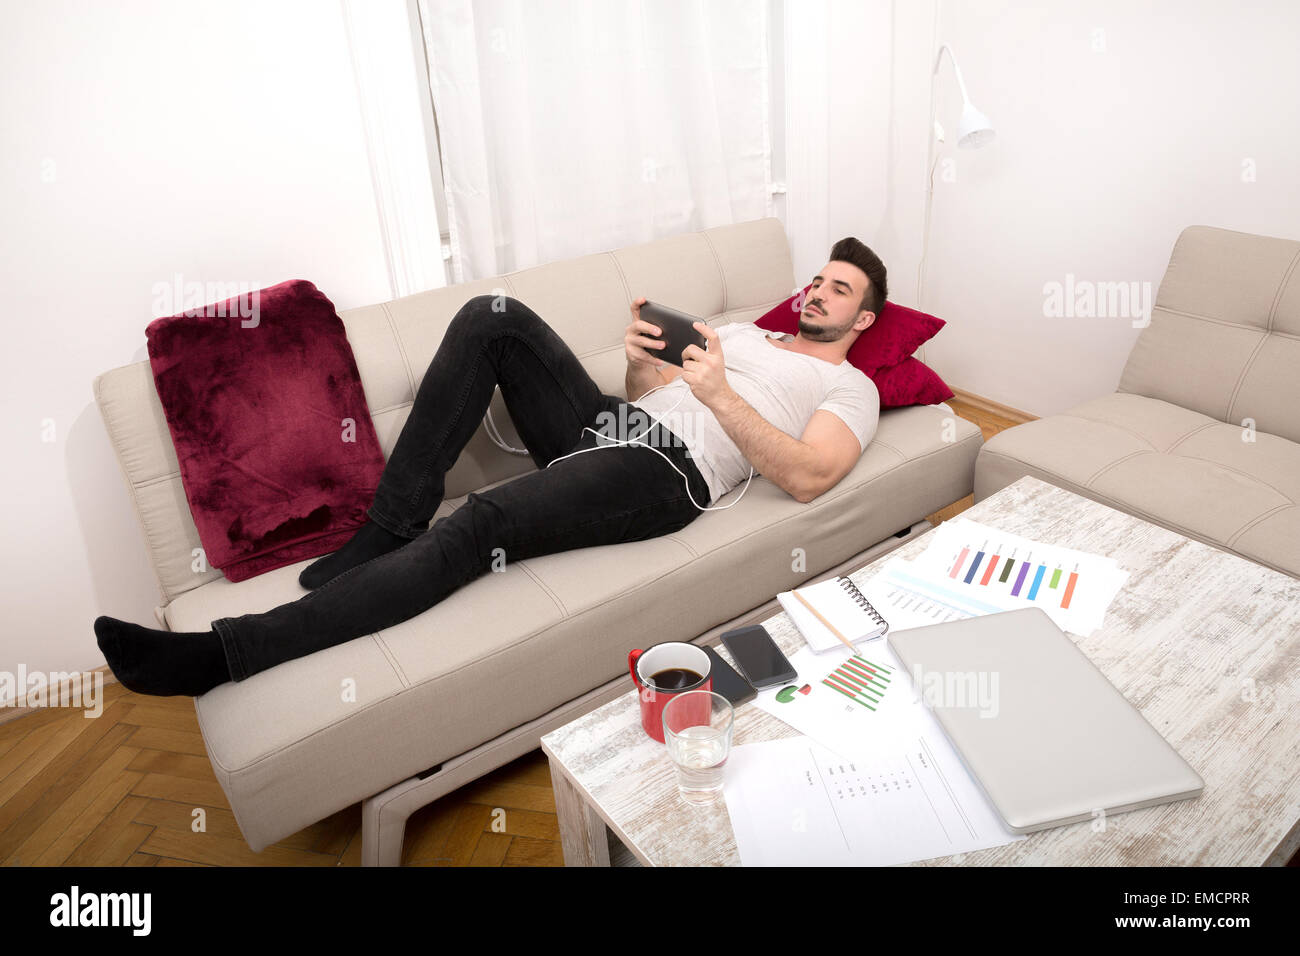 Relaxing after working long hours at home Stock Photo